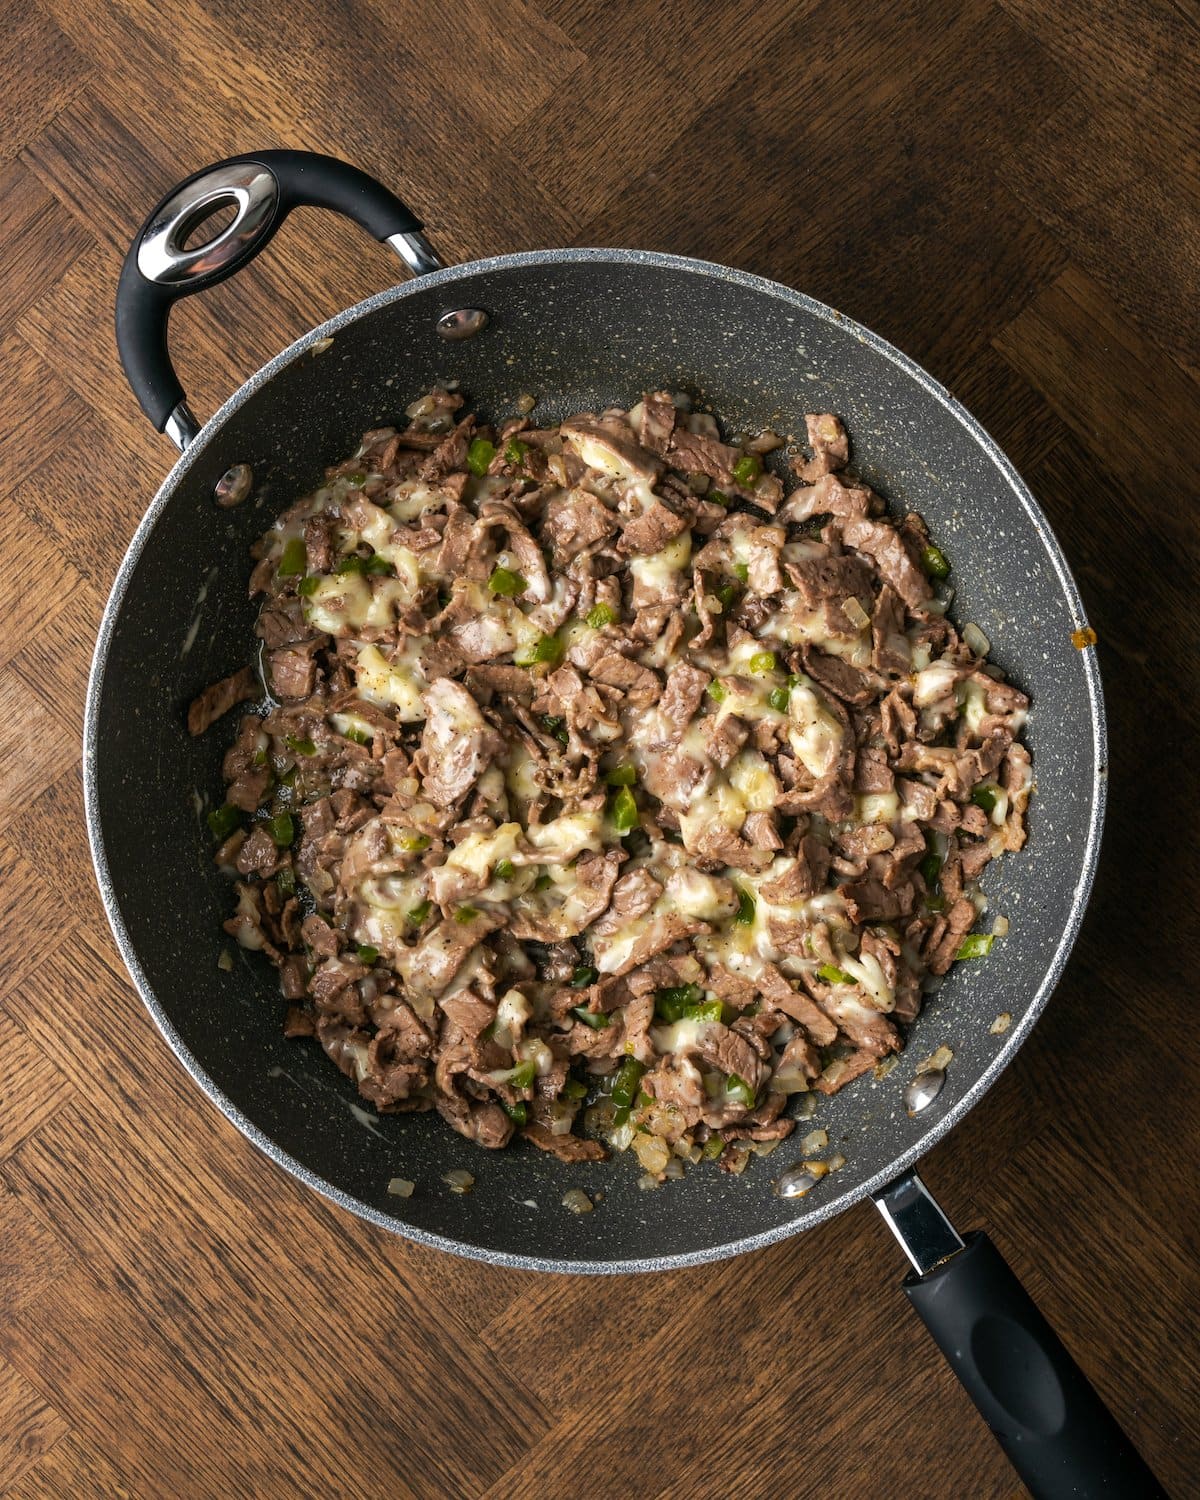 Philly cheesesteak mixture in a skillet.